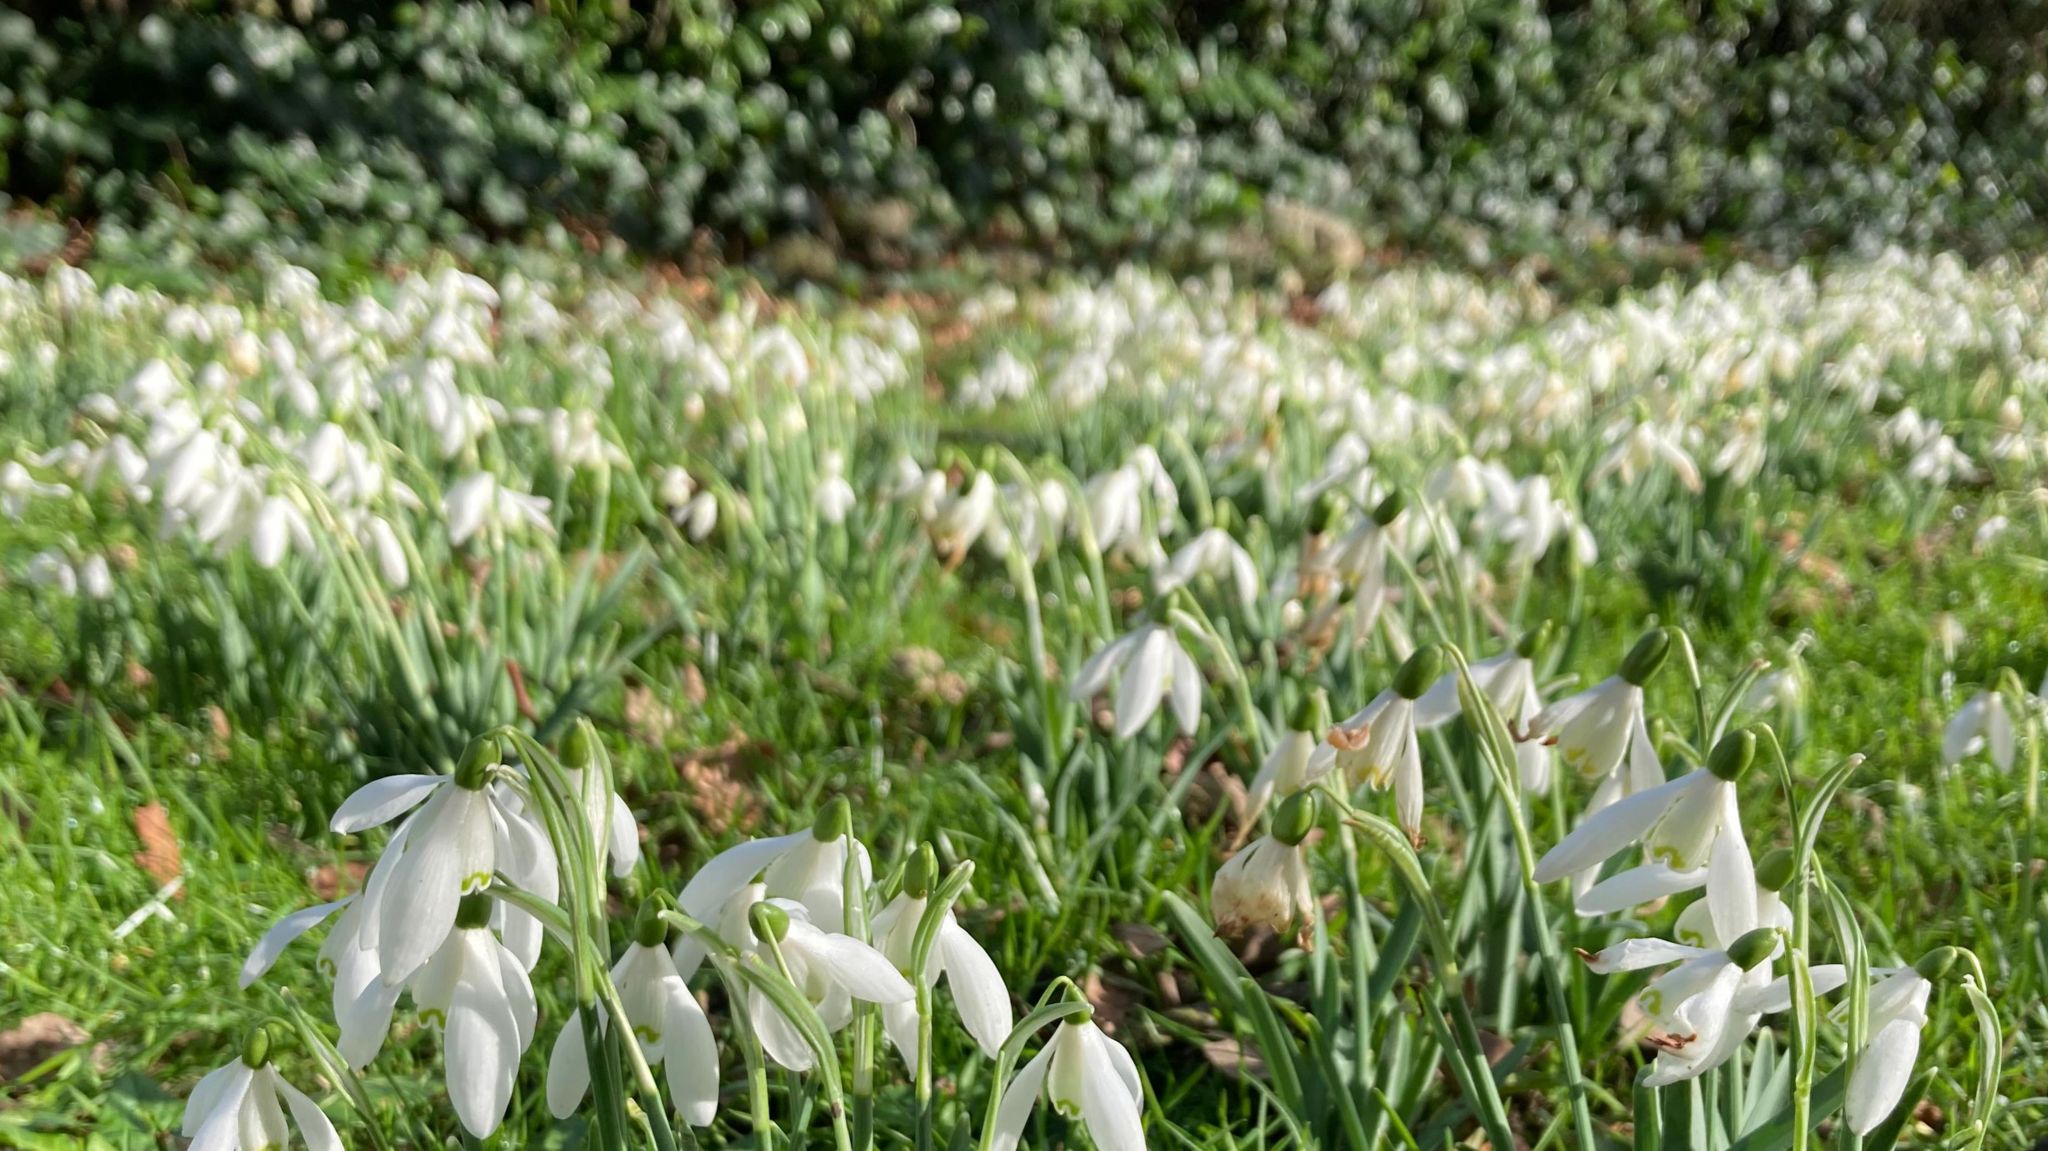 Over the years almost 500,000 snowdrop bulbs have been planted 